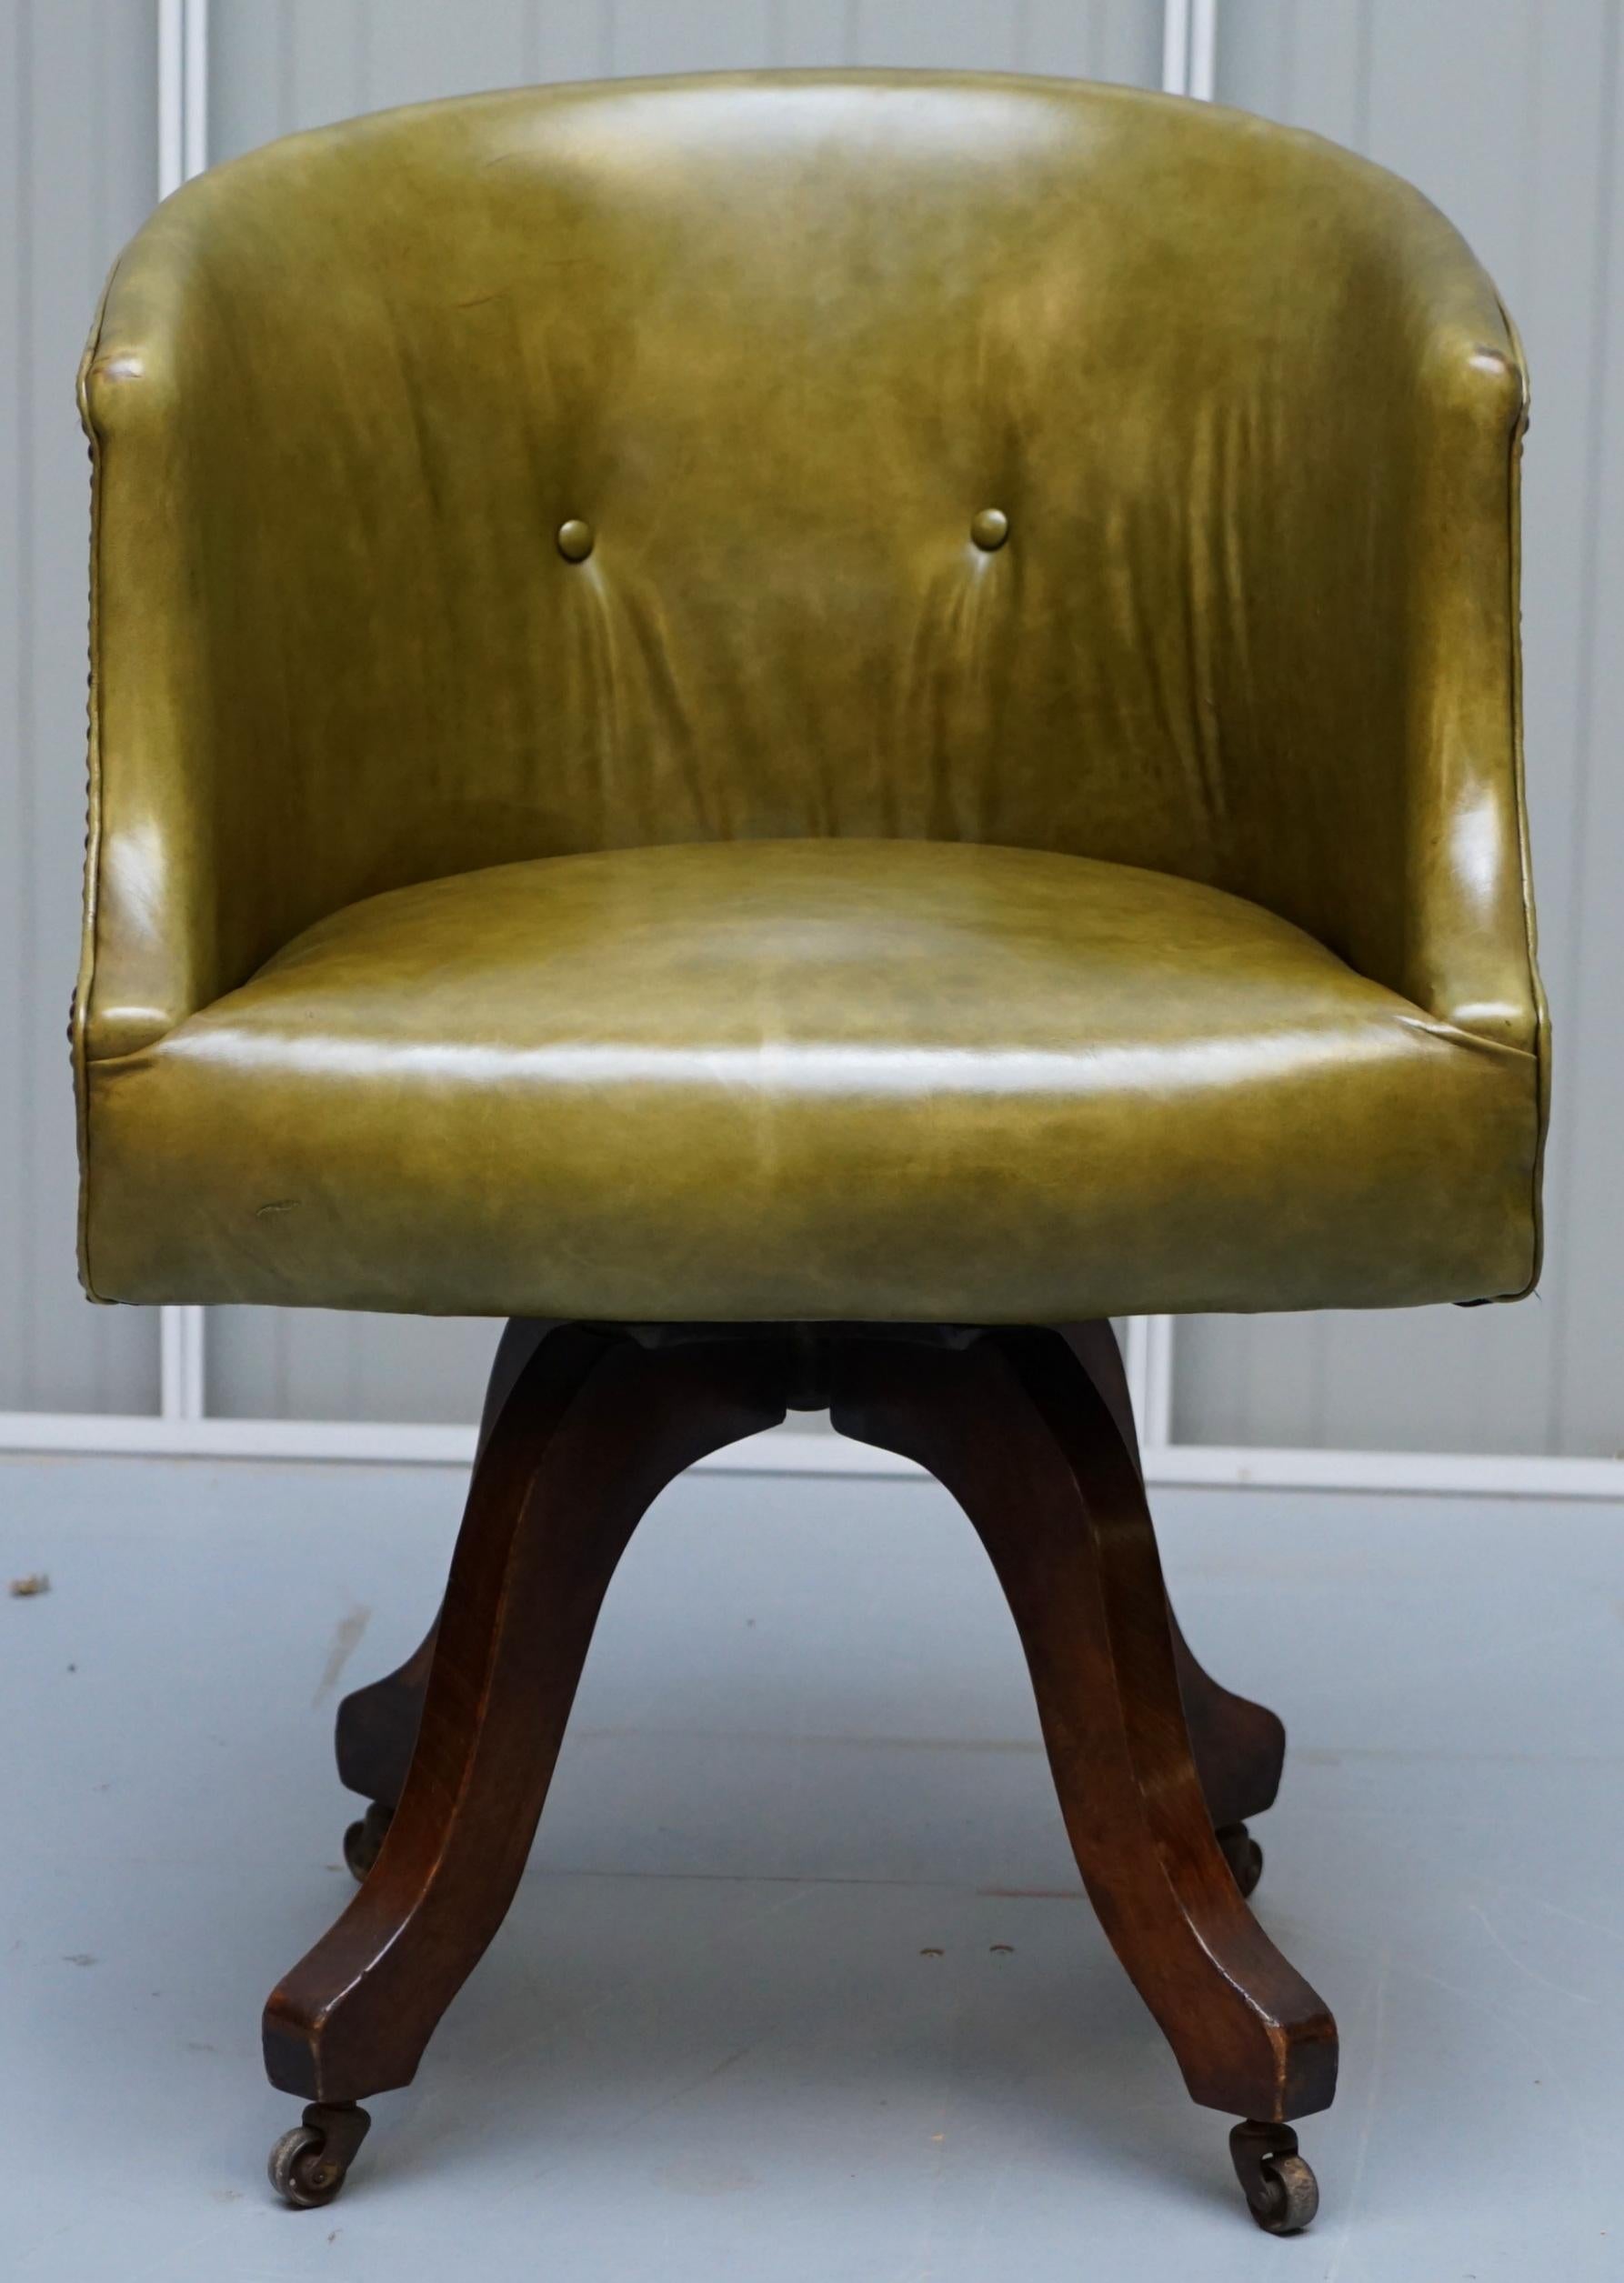 We are delighted to offer for sale this lovely early Victorian green leather barrel back captains chair with oak swivel base

A very good looking well made original chair. The base and frame is all solid English oak, its circa 1860, a very nice